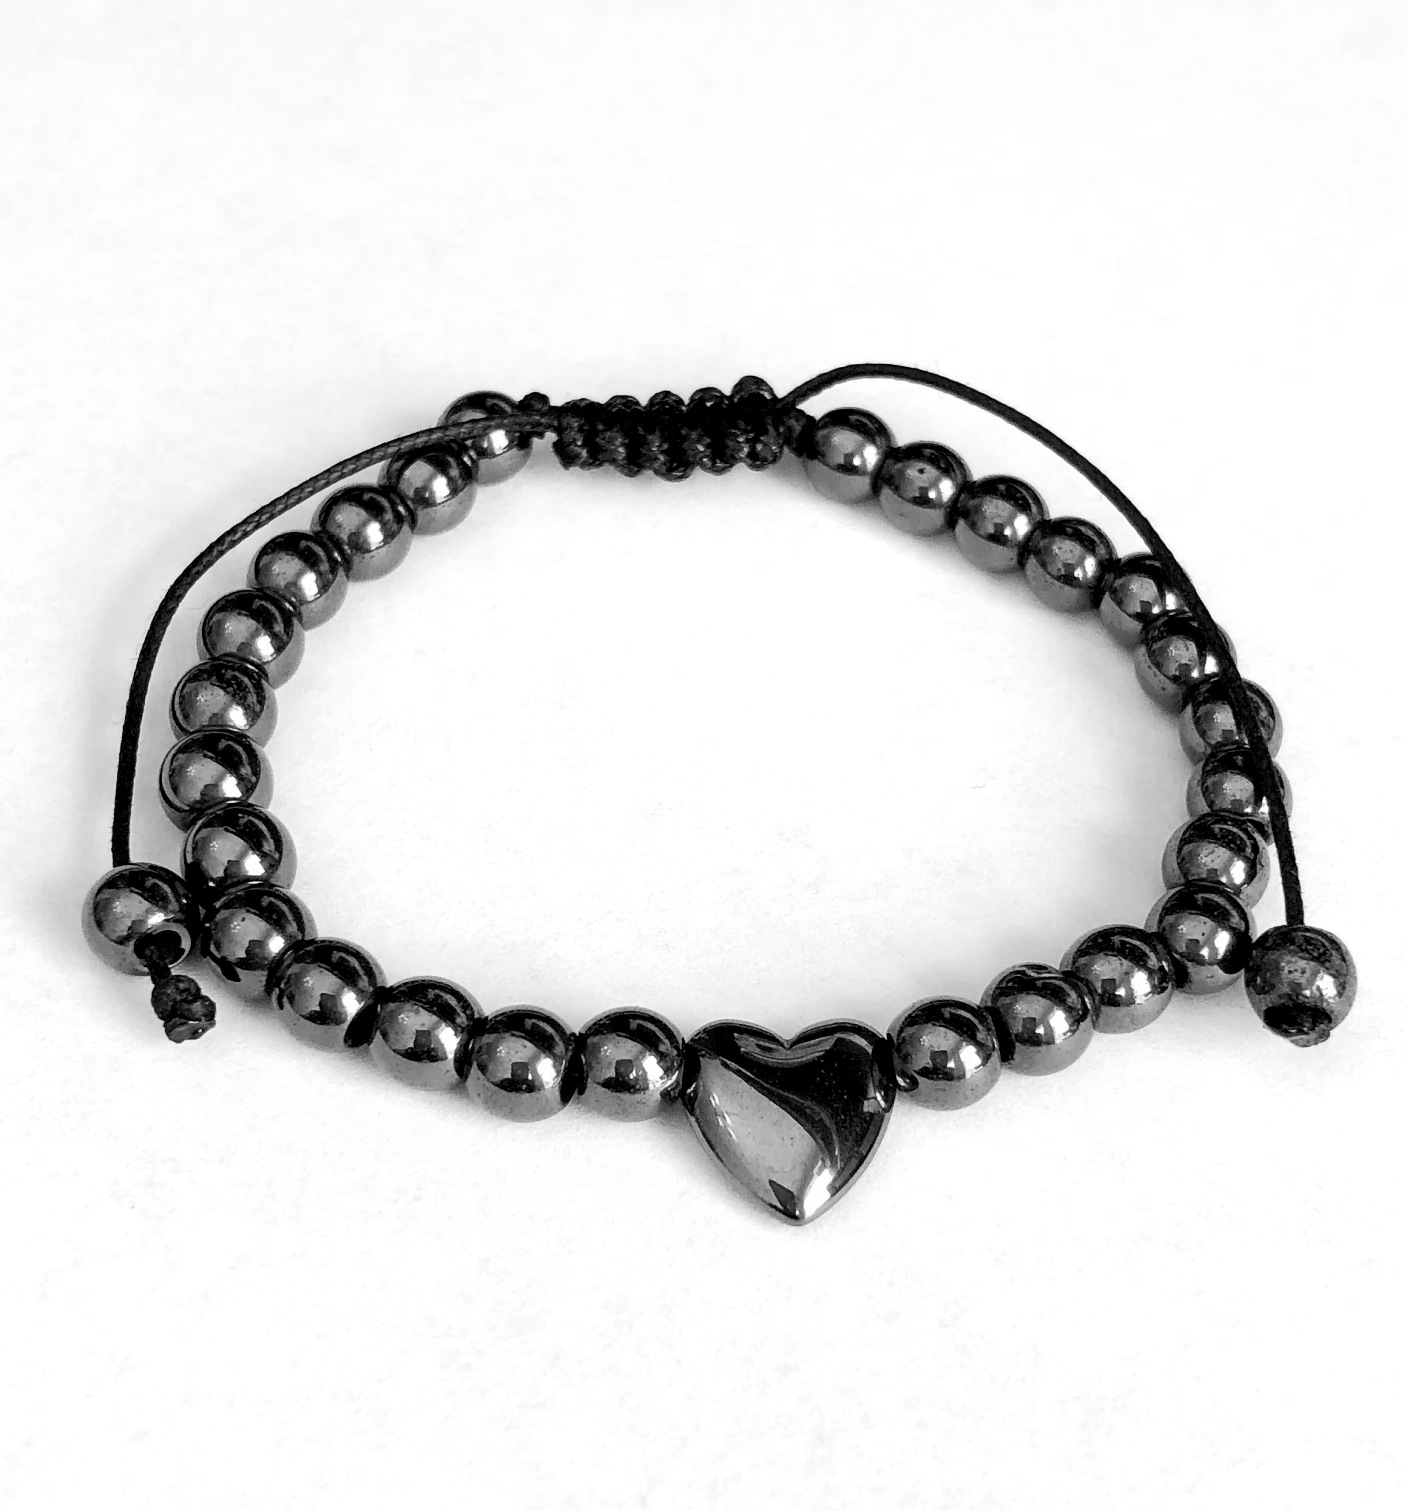 Hematite Heart Magnetic Bracelet on adjustable Cord One Size Fits All #MHB-572